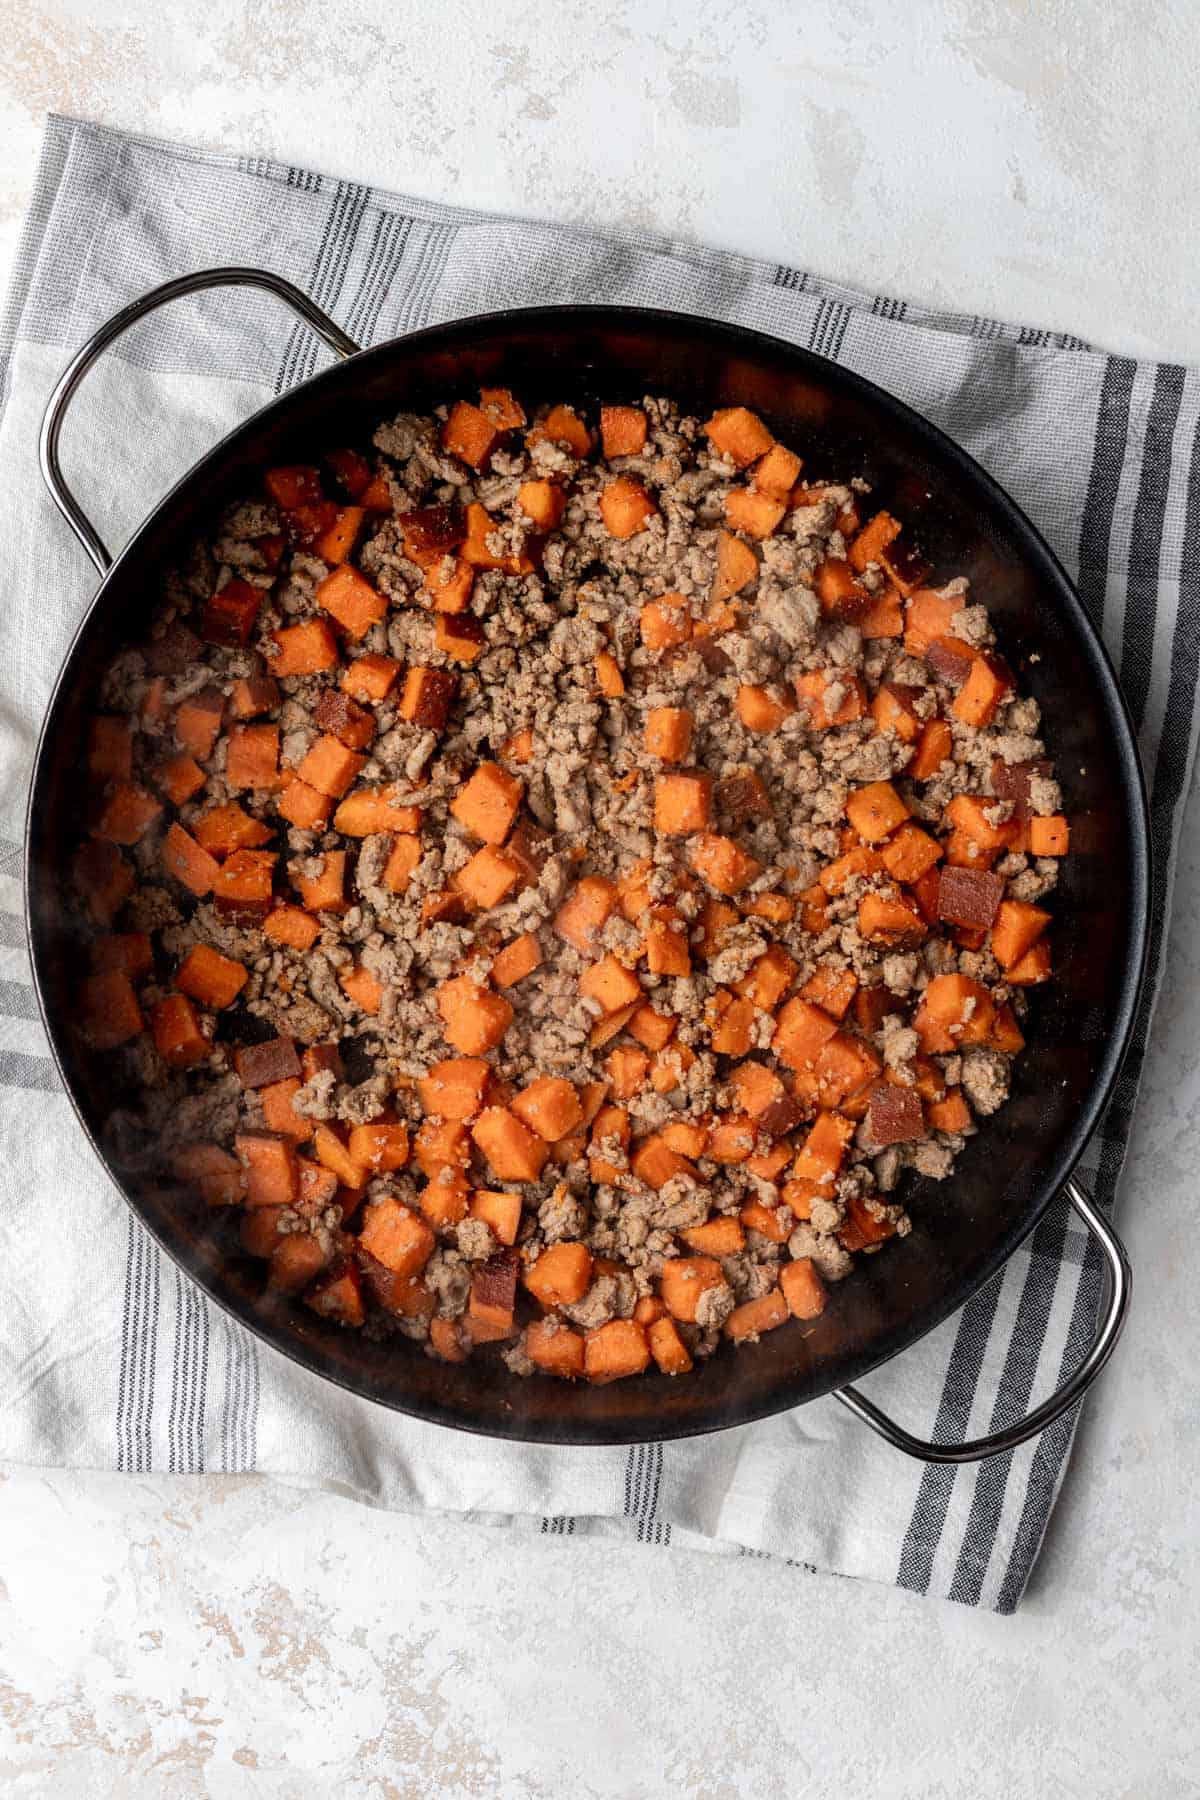 Cooked sweet potatoes with ground turkey in a large skillet.